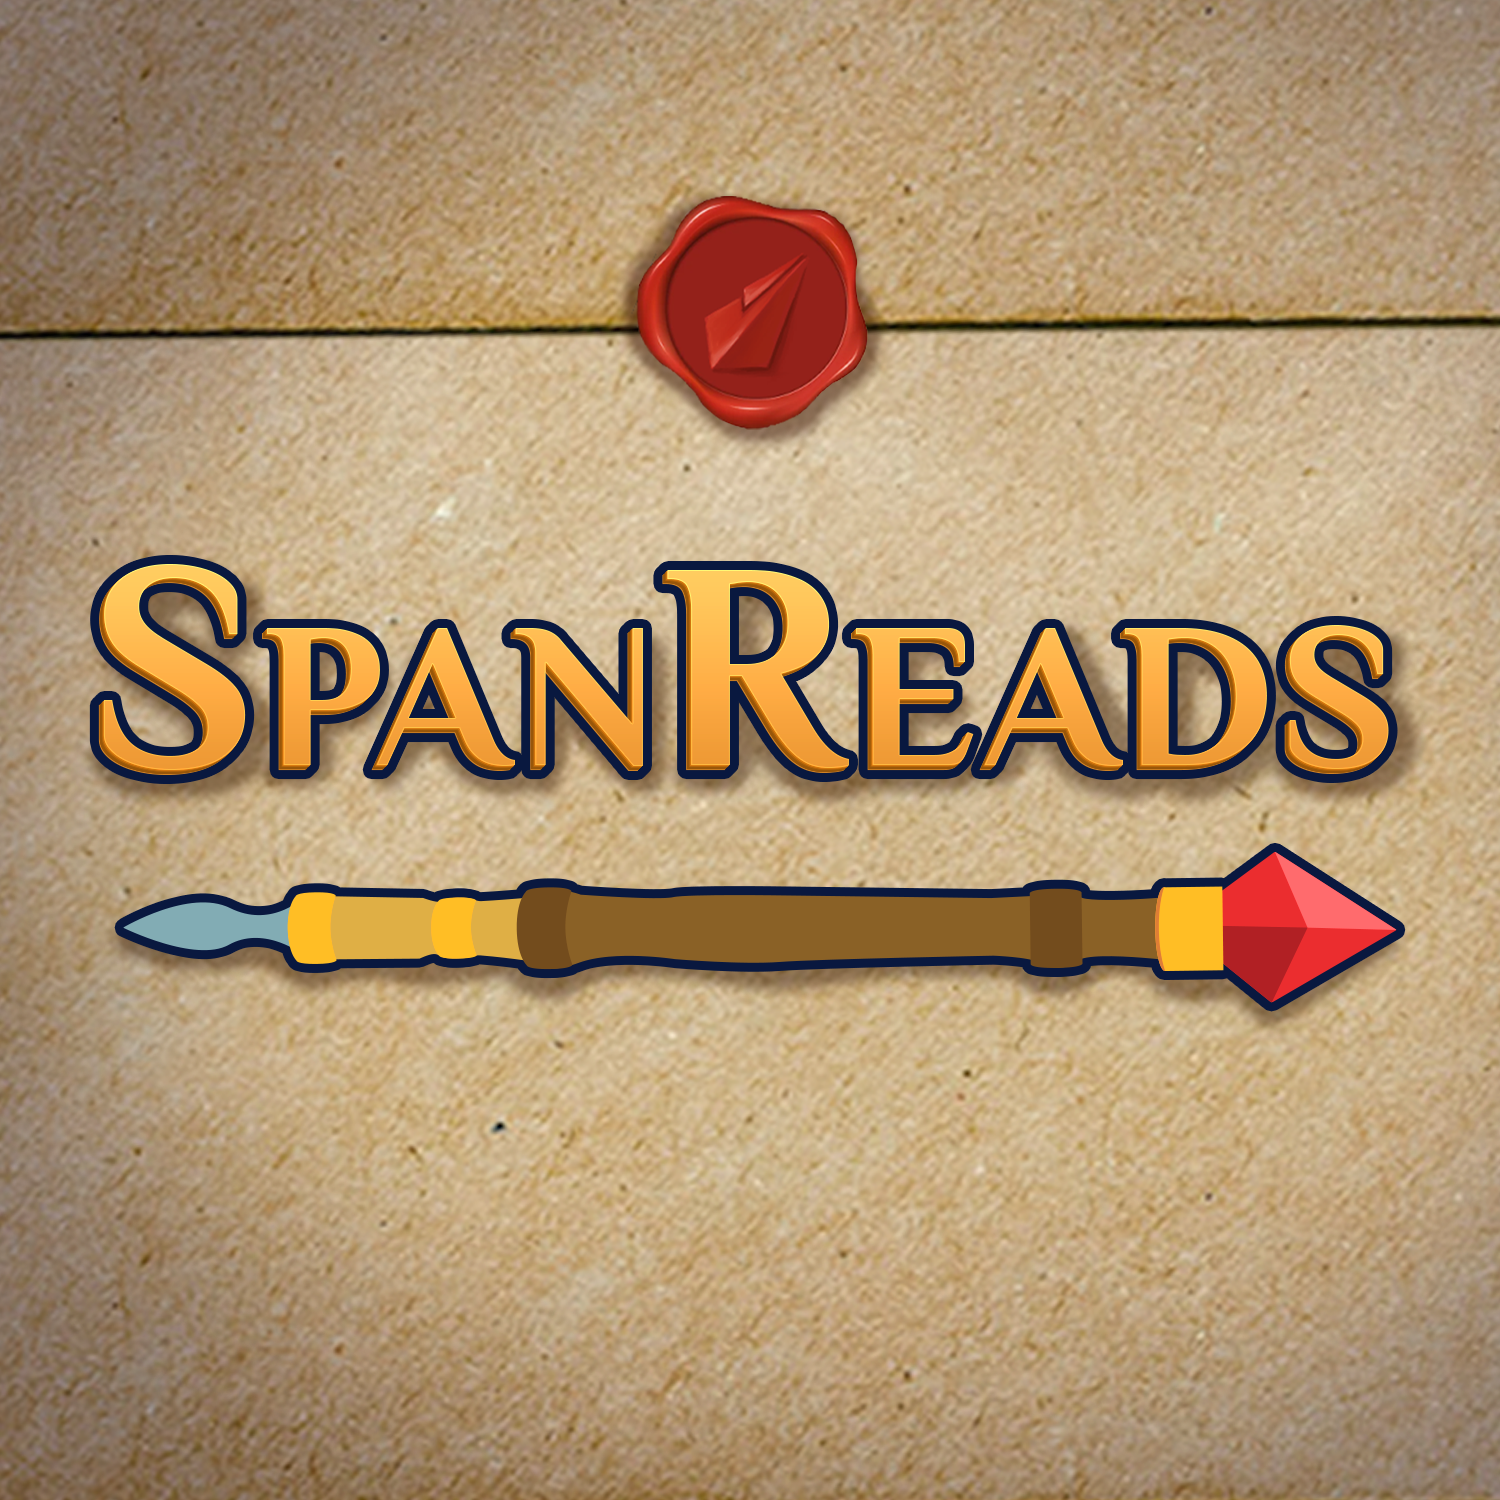 More information about "SpanReads: The Final Empire - Characters & Relationships"